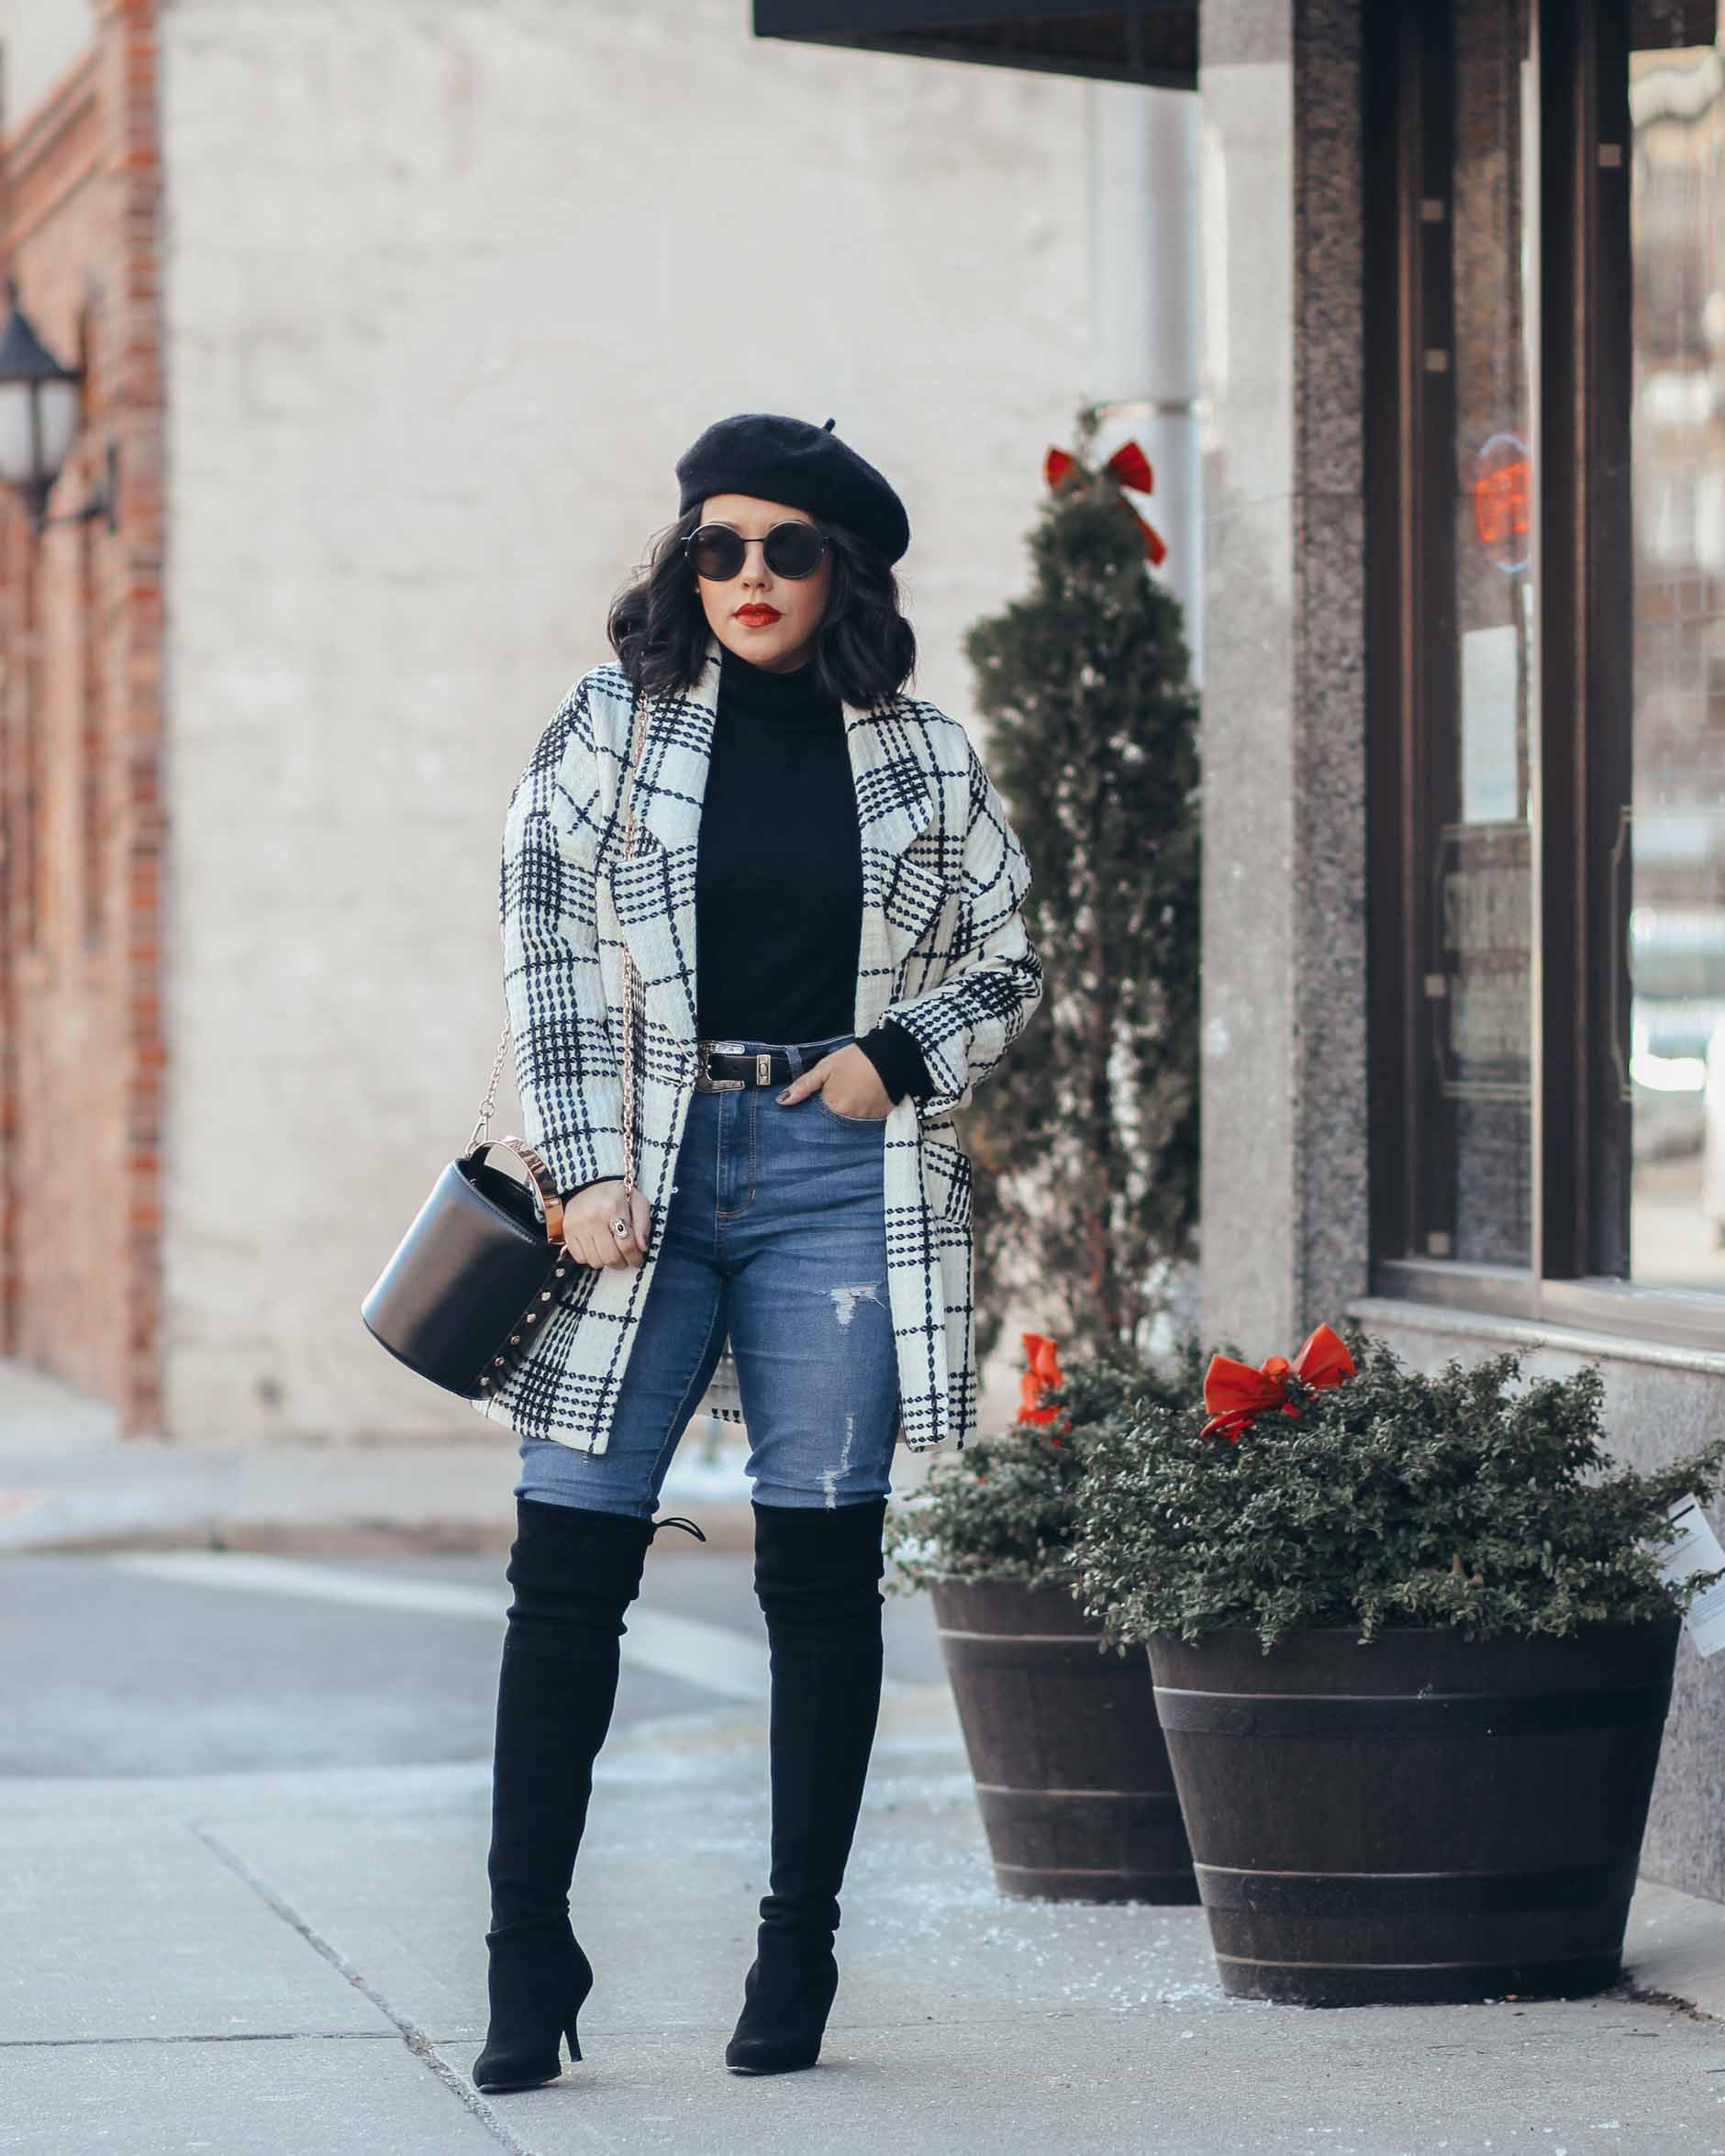 lifestyle blogger naty michele wearing a white and black coat with a beret and otk boots